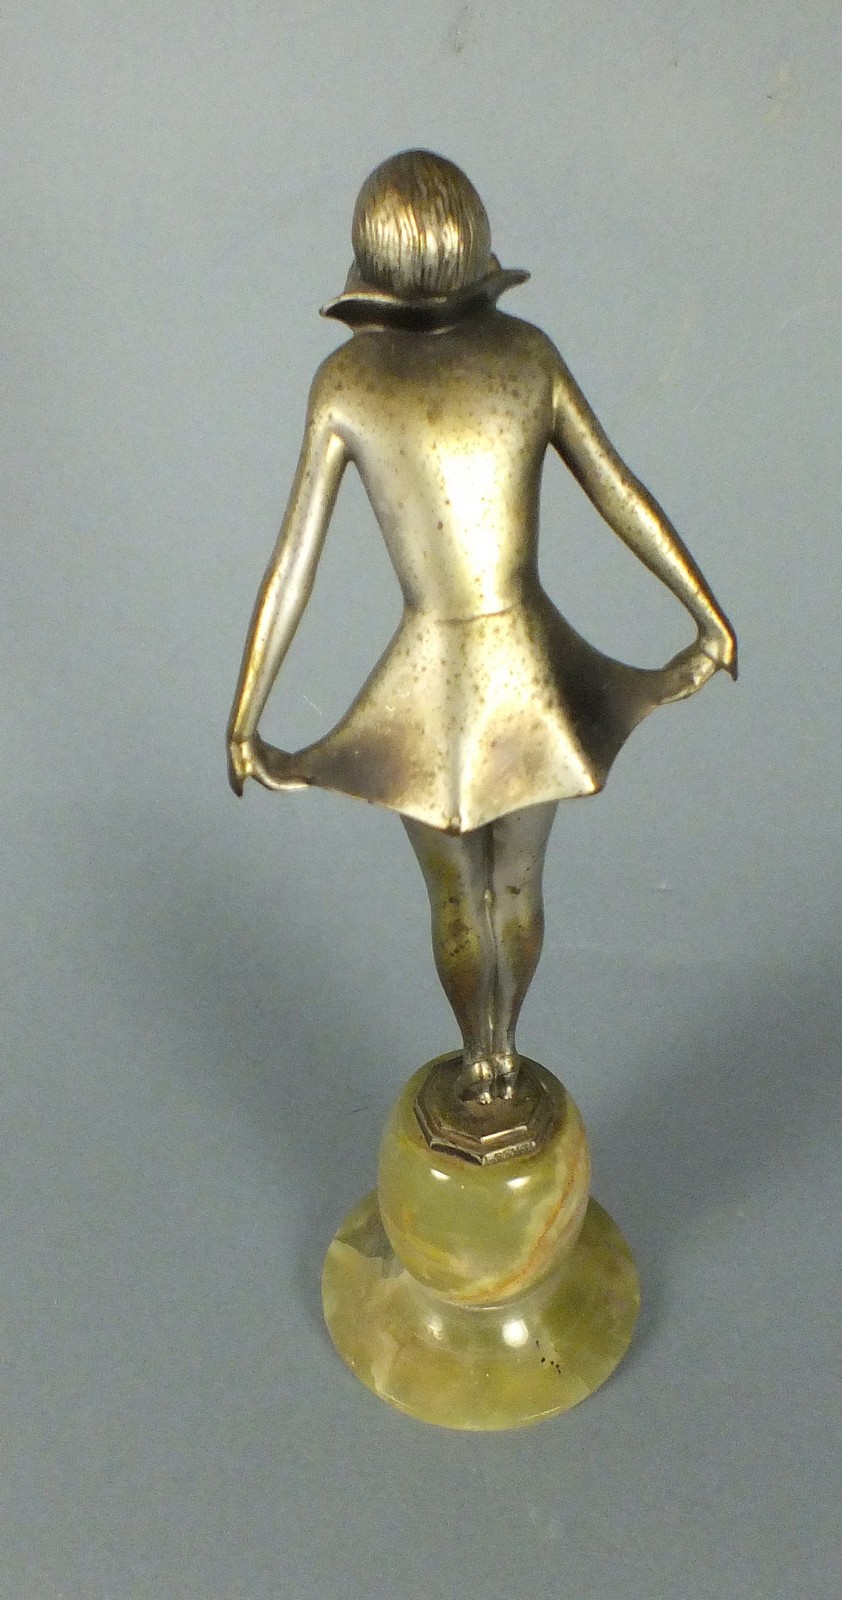 Josef LORENZL (Austrian 1892-1950) Young Woman Curtseying, Silvered bronze raised on an onyx base, - Image 2 of 2